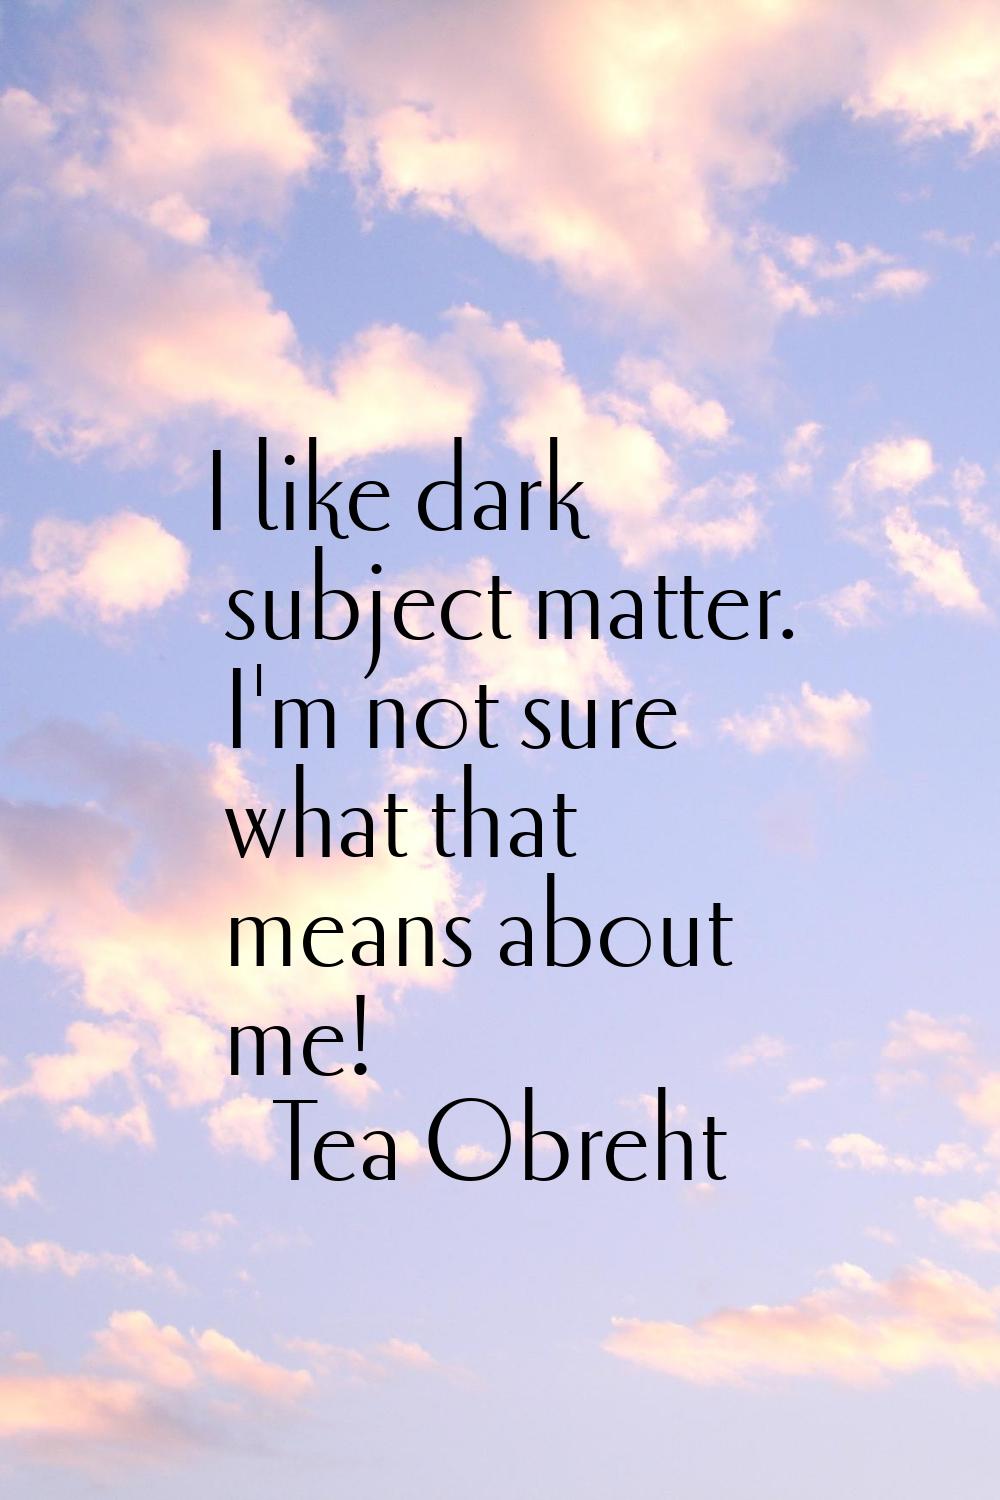 I like dark subject matter. I'm not sure what that means about me!